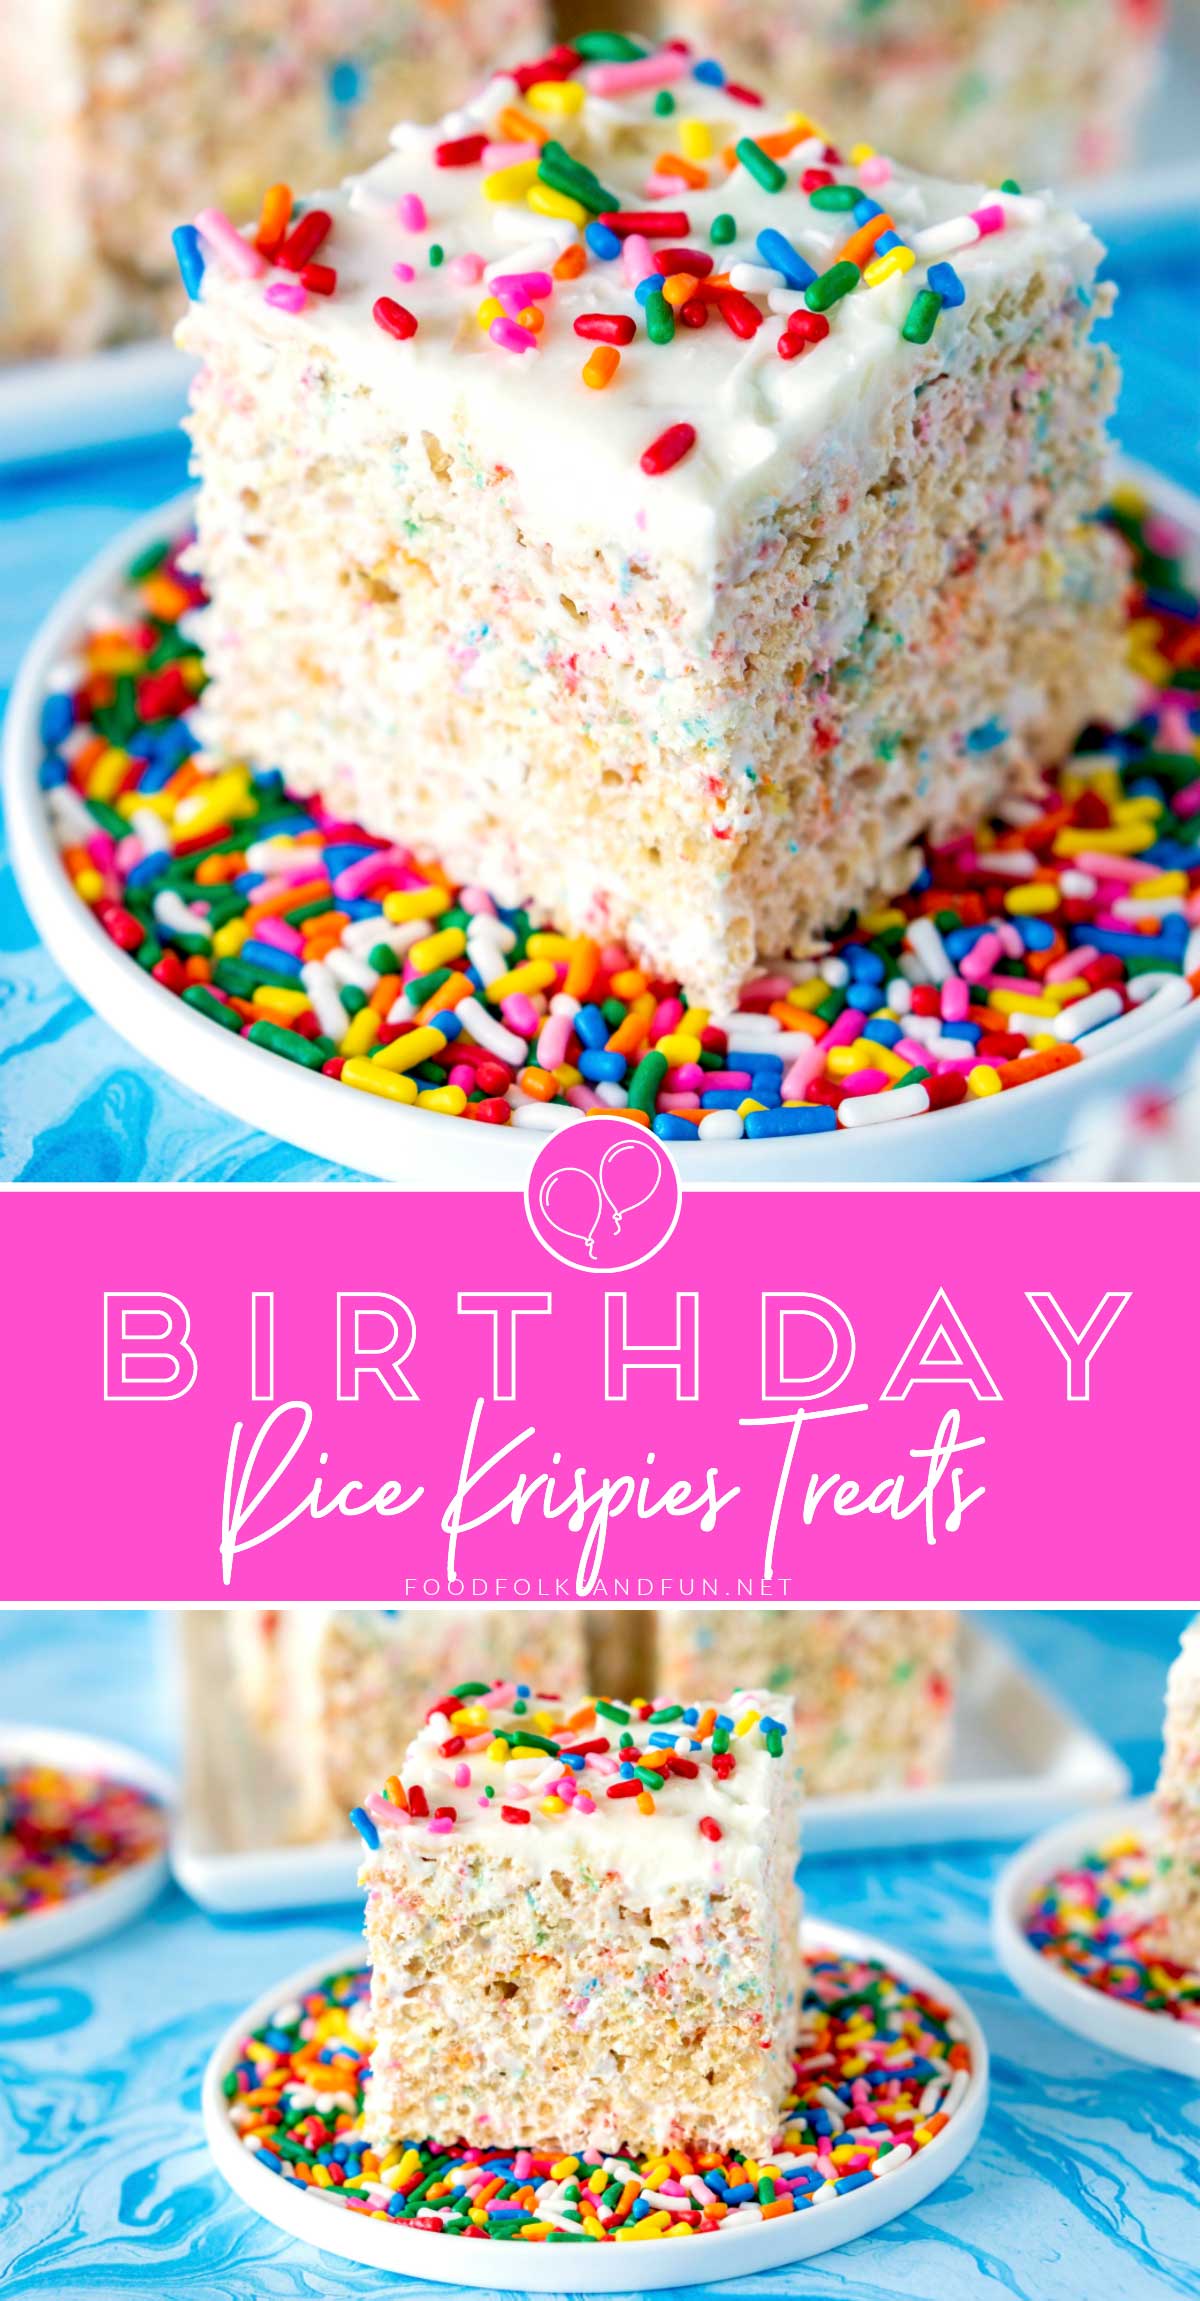 This Birthday Rice Krispies Treats recipe is made with loads of marshmallows, sprinkles, and frosting! They're huge, gooey, and perfect for birthdays! #Birthday #BirthdayTreat #BirthdayDessert #Dessert #BirthdayRecipe #DessertRecipe #RiceKrispiesTreats #FoodFolksandFun via @foodfolksandfun